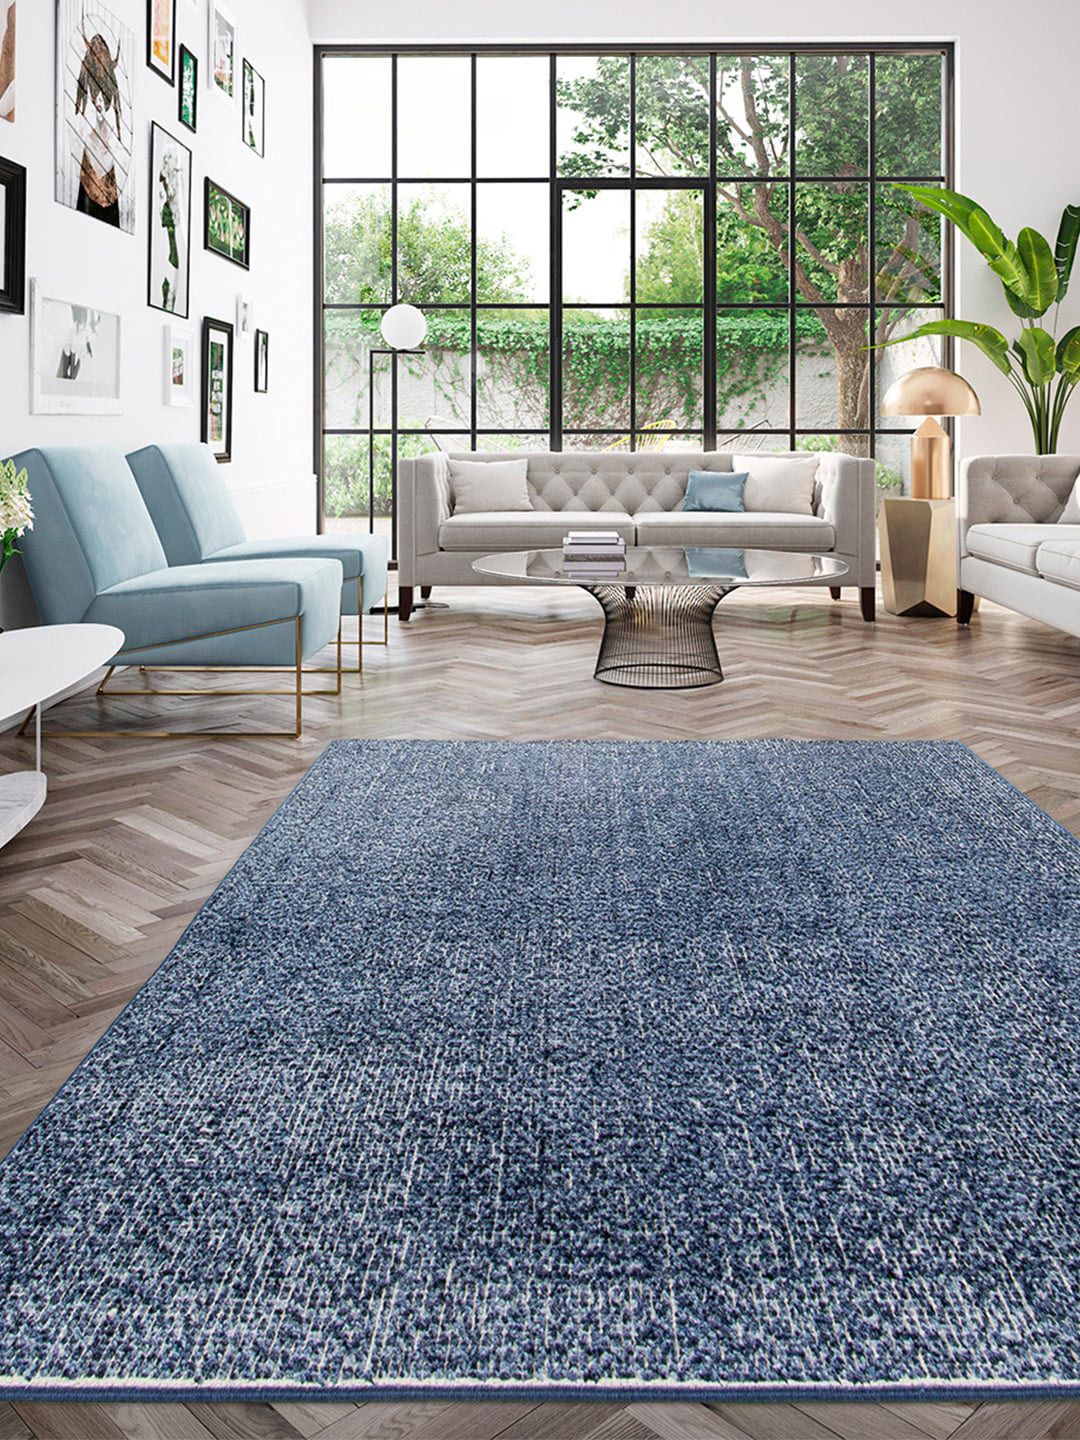 DDecor Navy Blue Solid Polypropylene Carpet Price in India